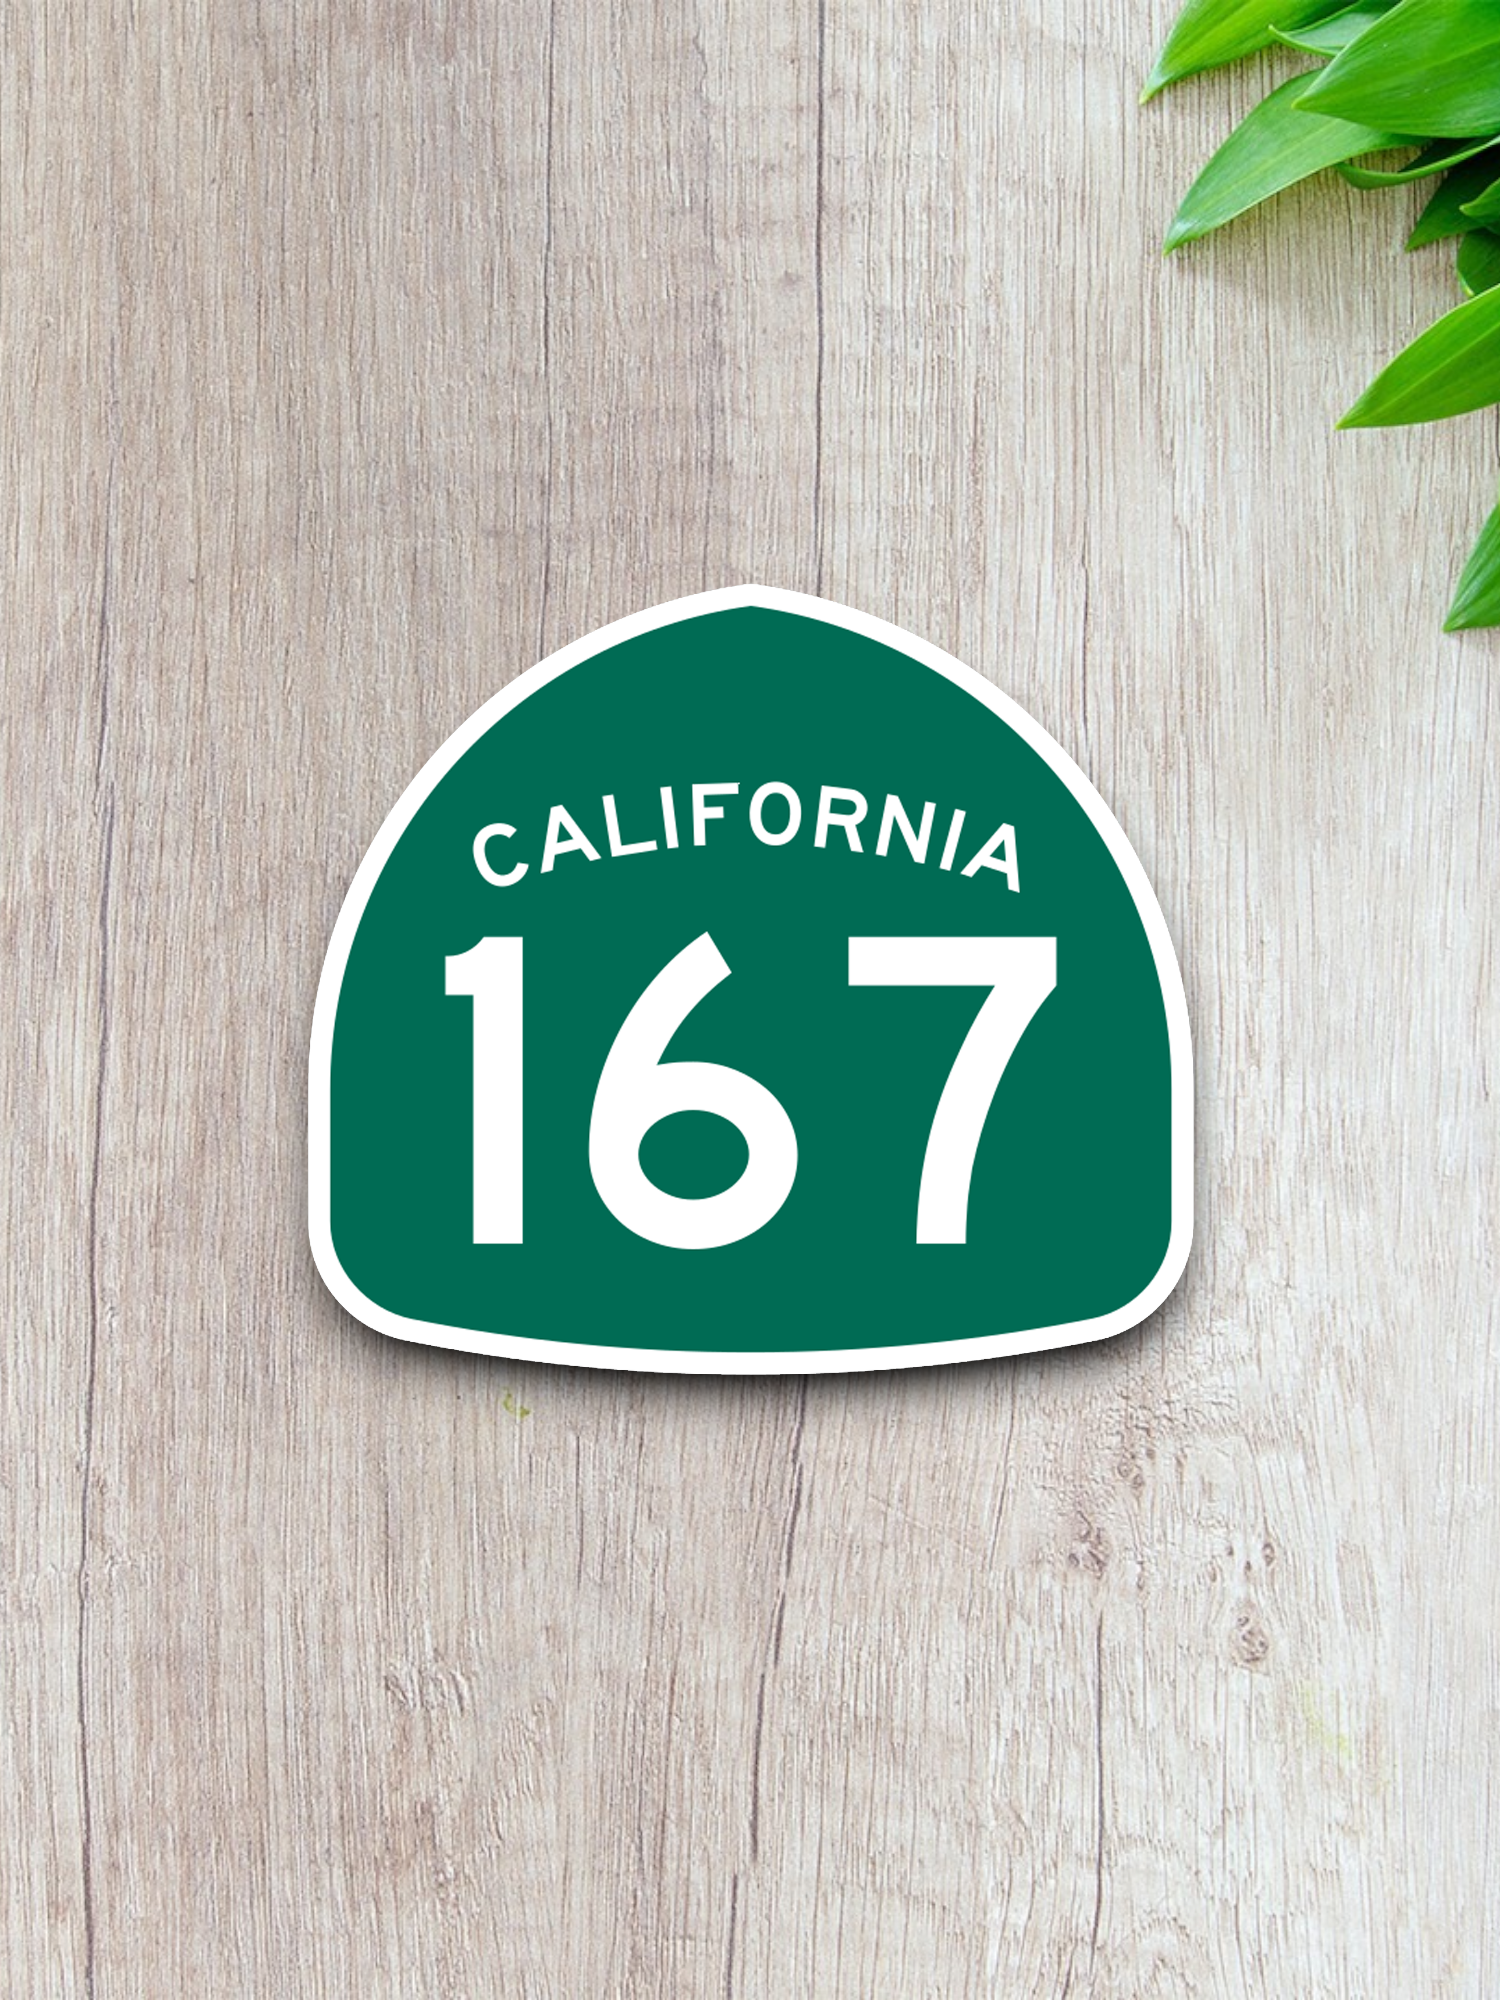 California State Route 167 Road Sign Sticker